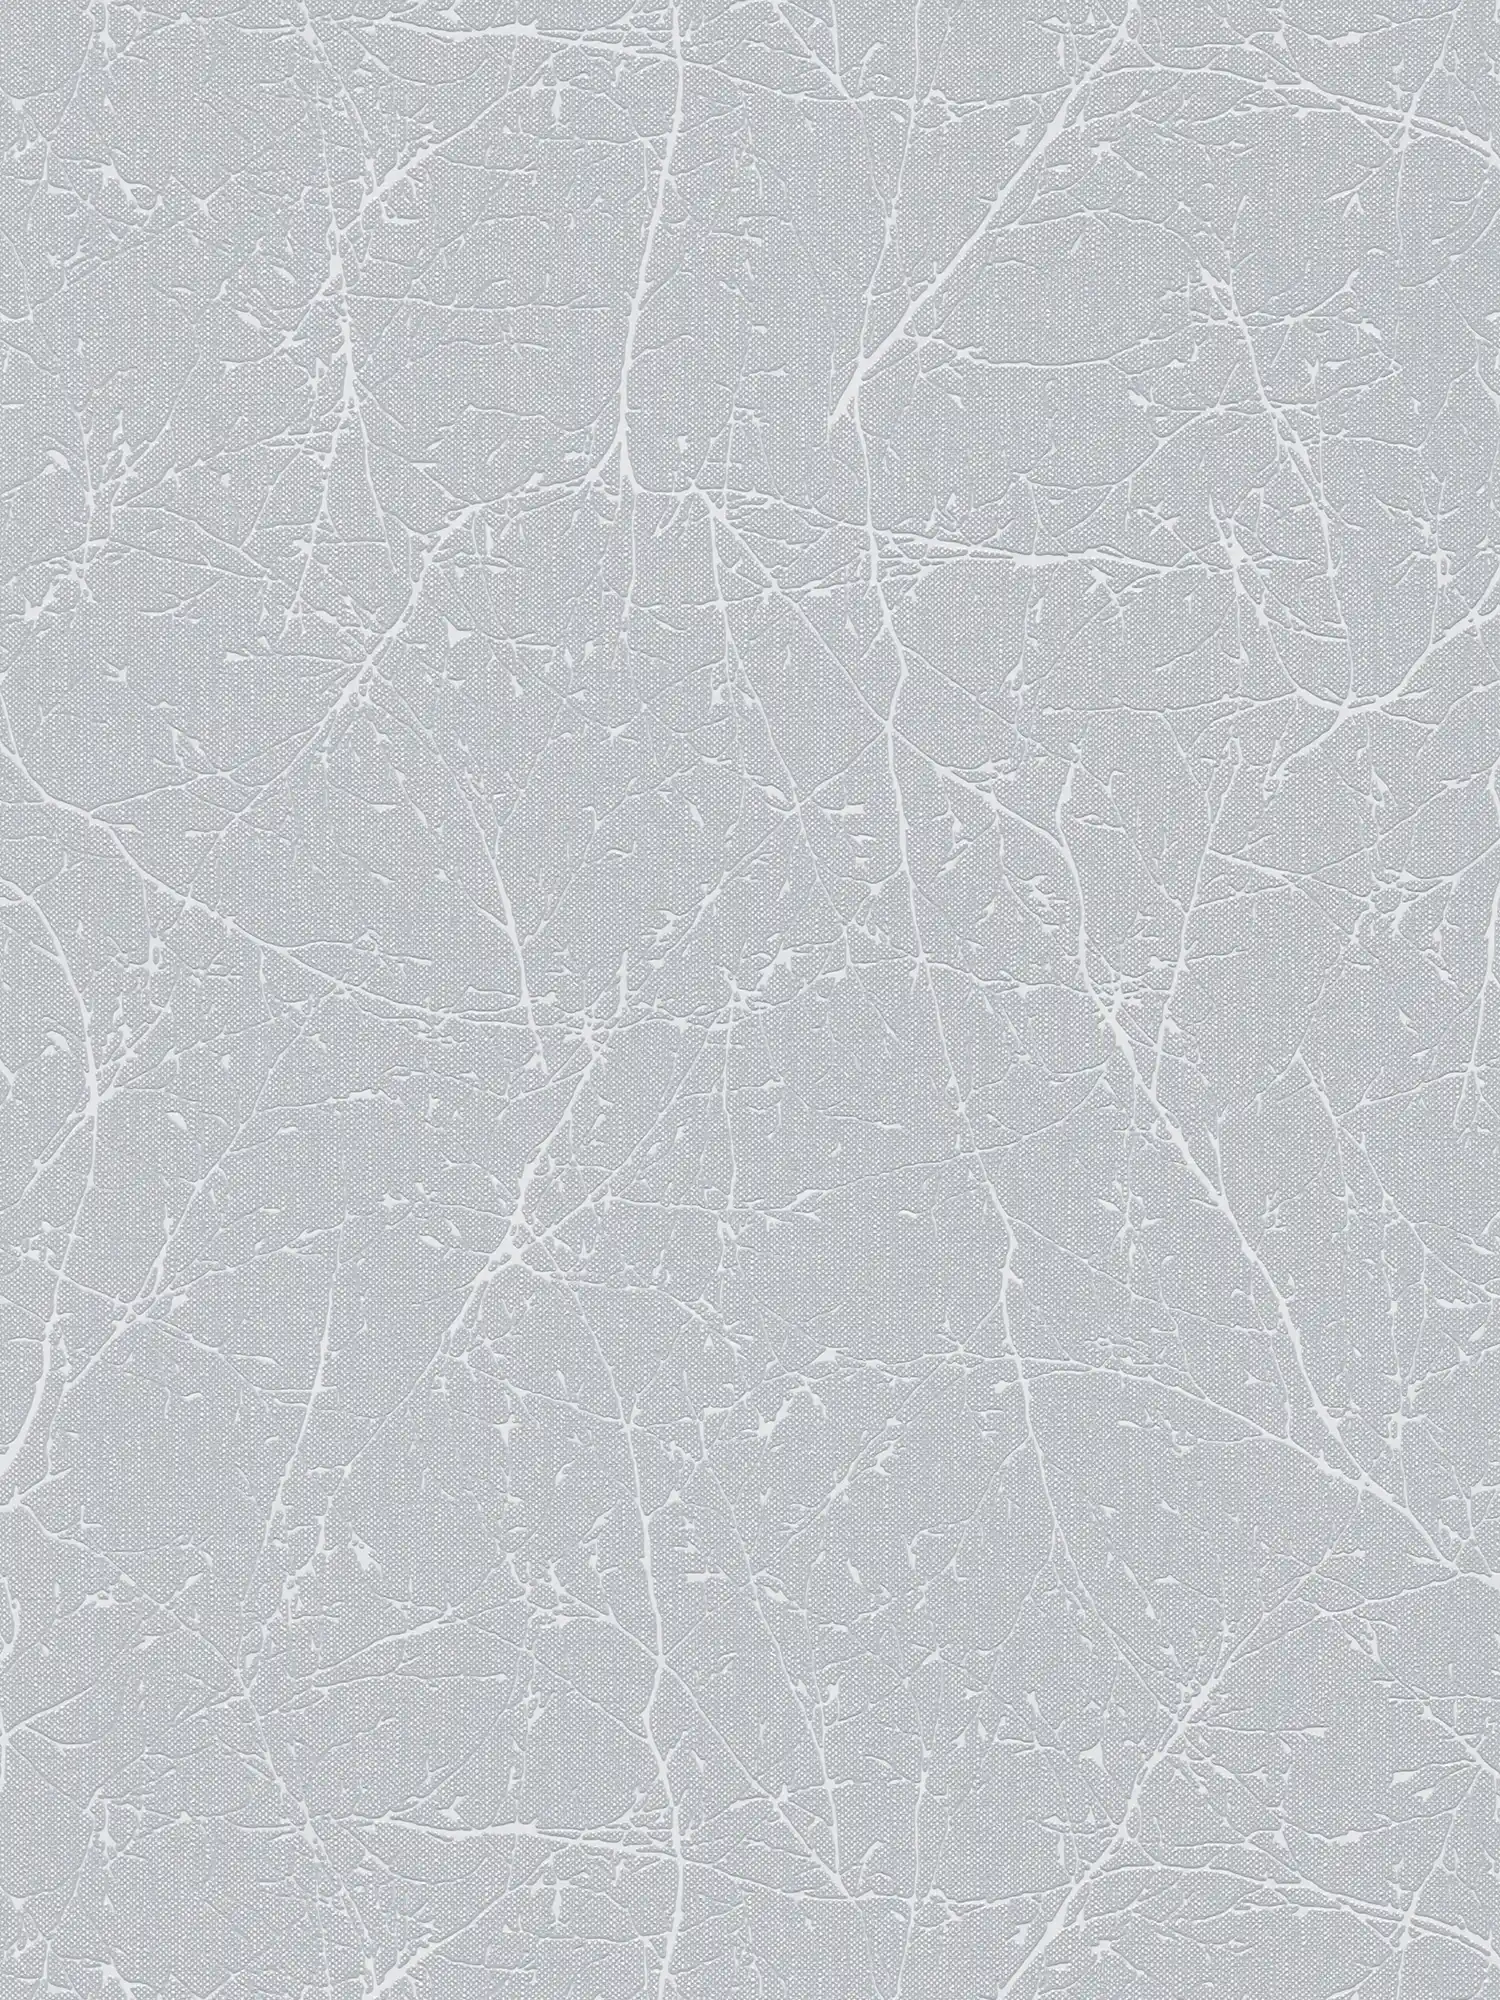         Non-woven wallpaper with branch pattern and light structure - light grey, white
    